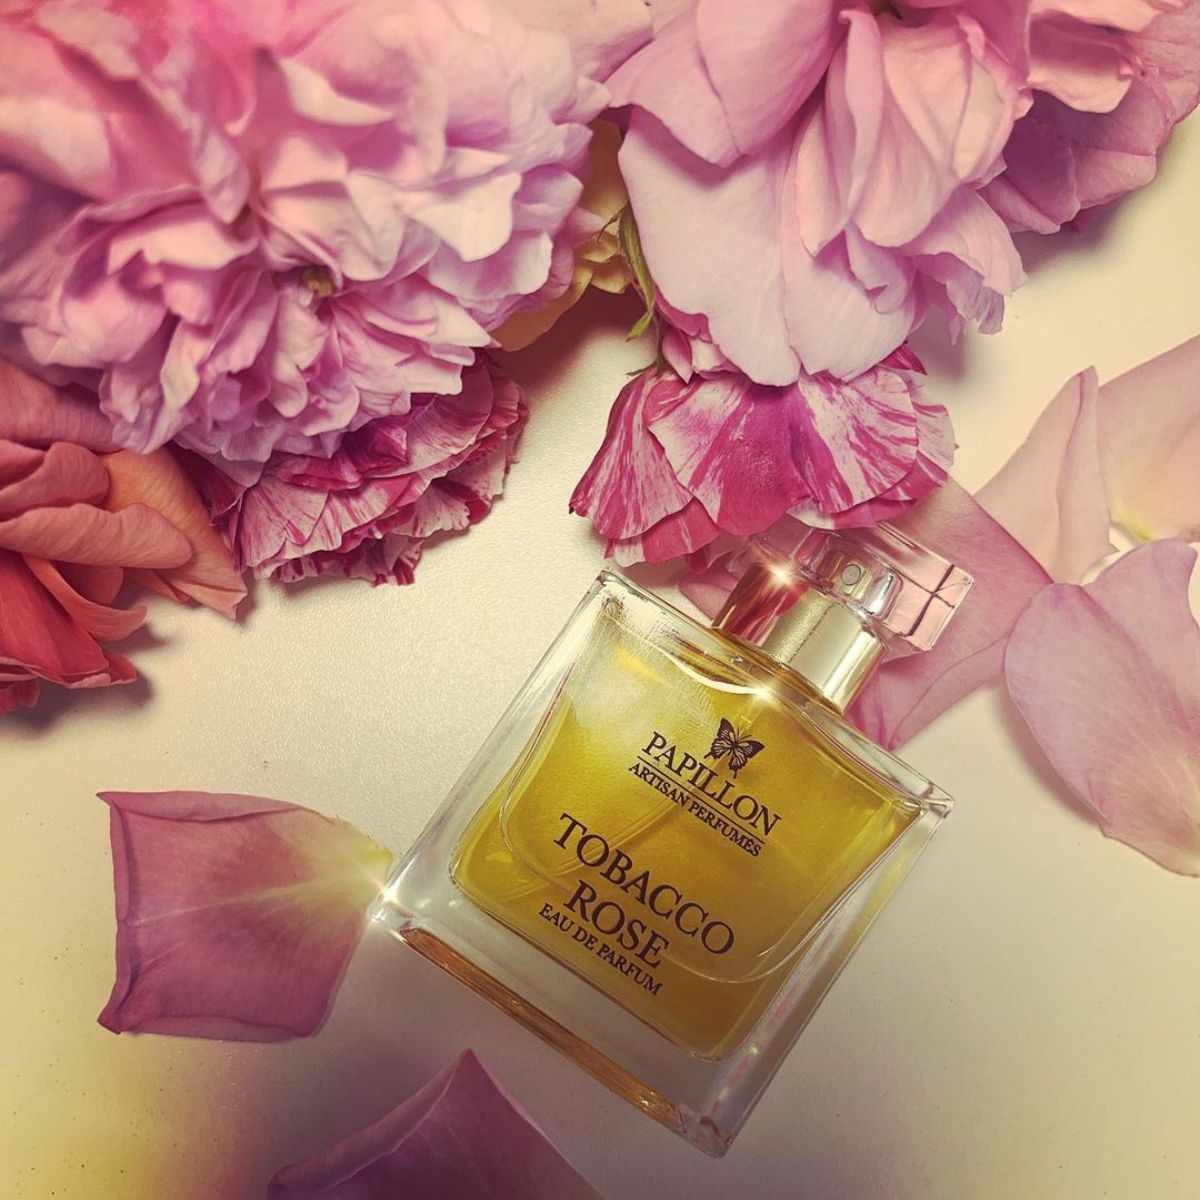 Image of the perfume Tobcaco Rose by the brand Papillon